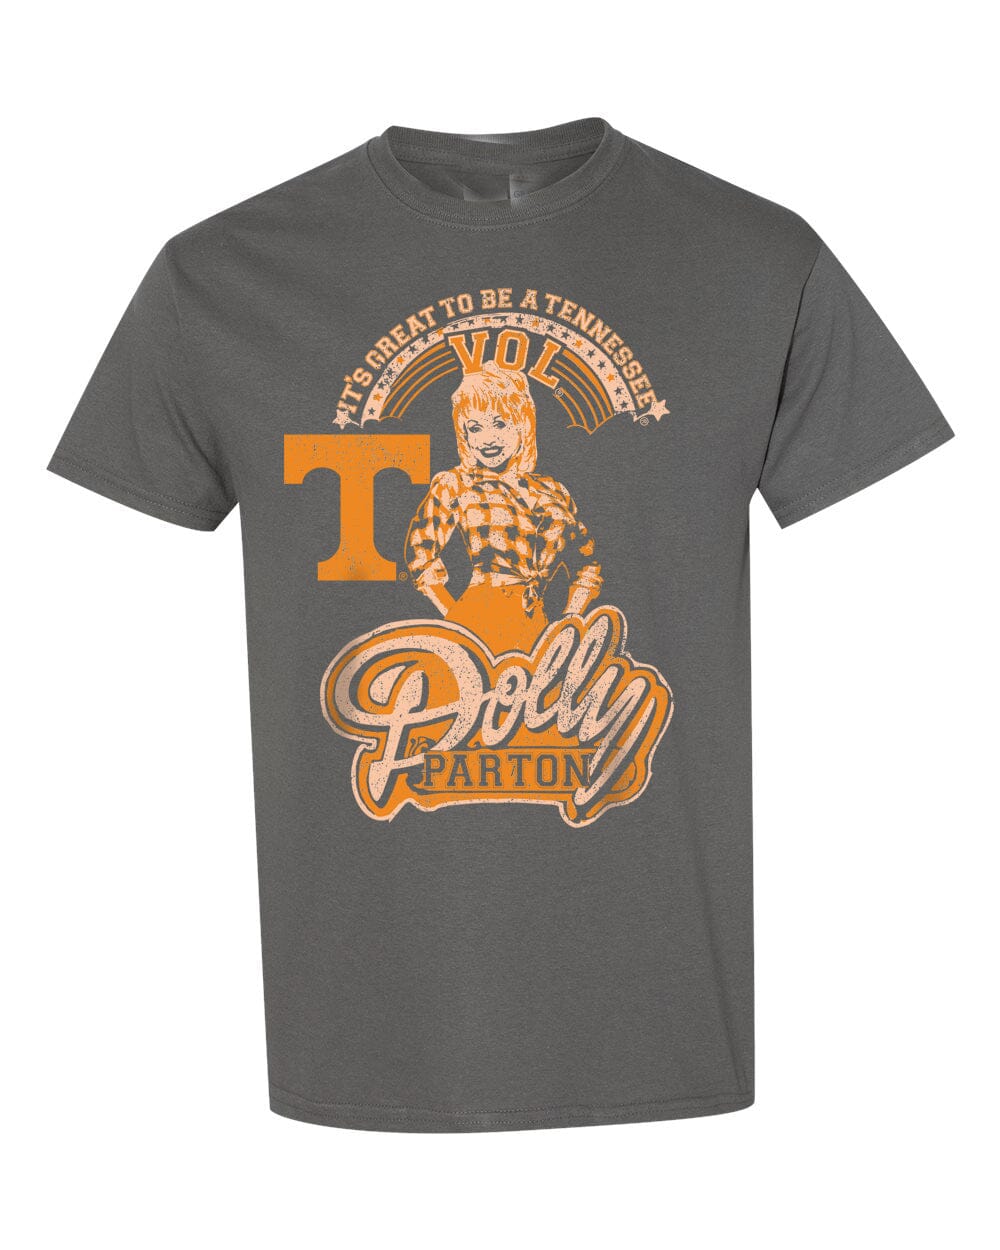 Children's Dolly Parton Great To Be a Tennessee Vol Charcoal Tee